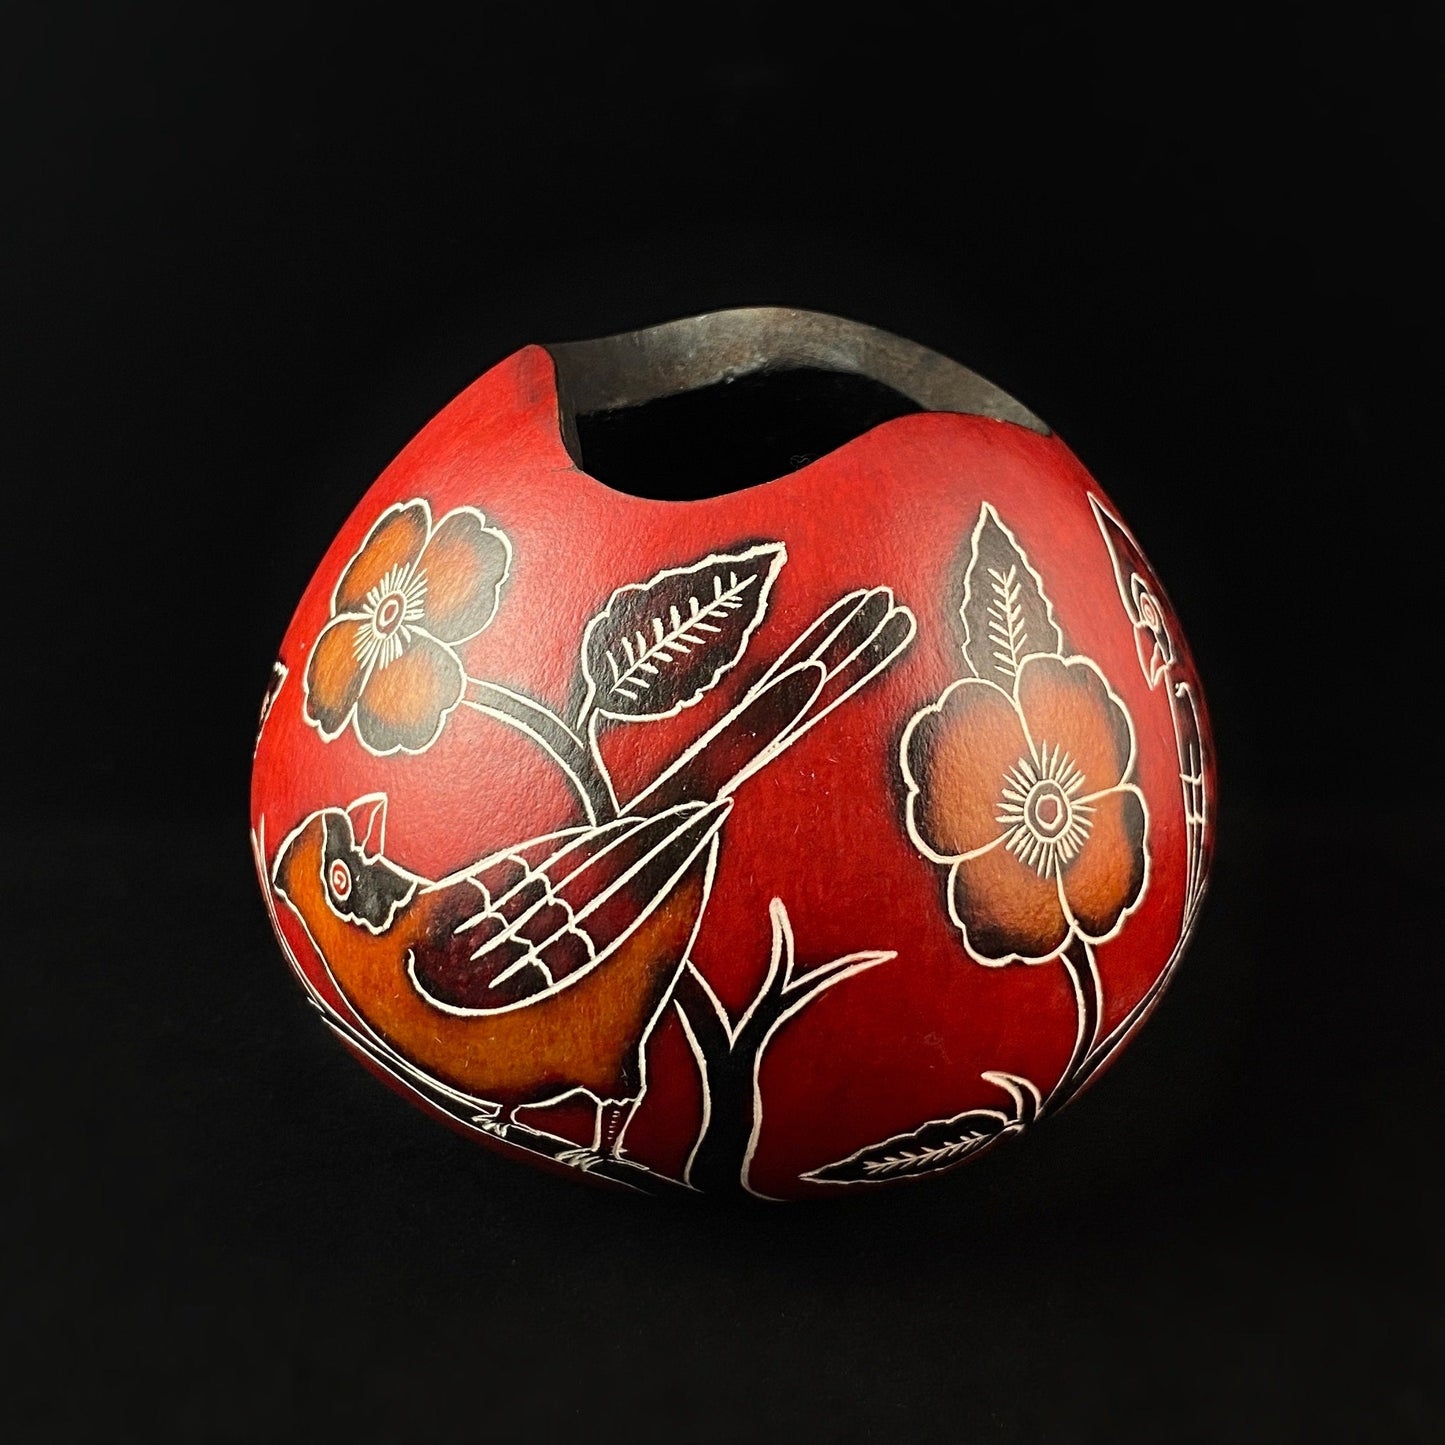 Decorative Red Cardinal Jewelry Box/Container - Hand-Carved and Hand Painted Peruvian Gourd